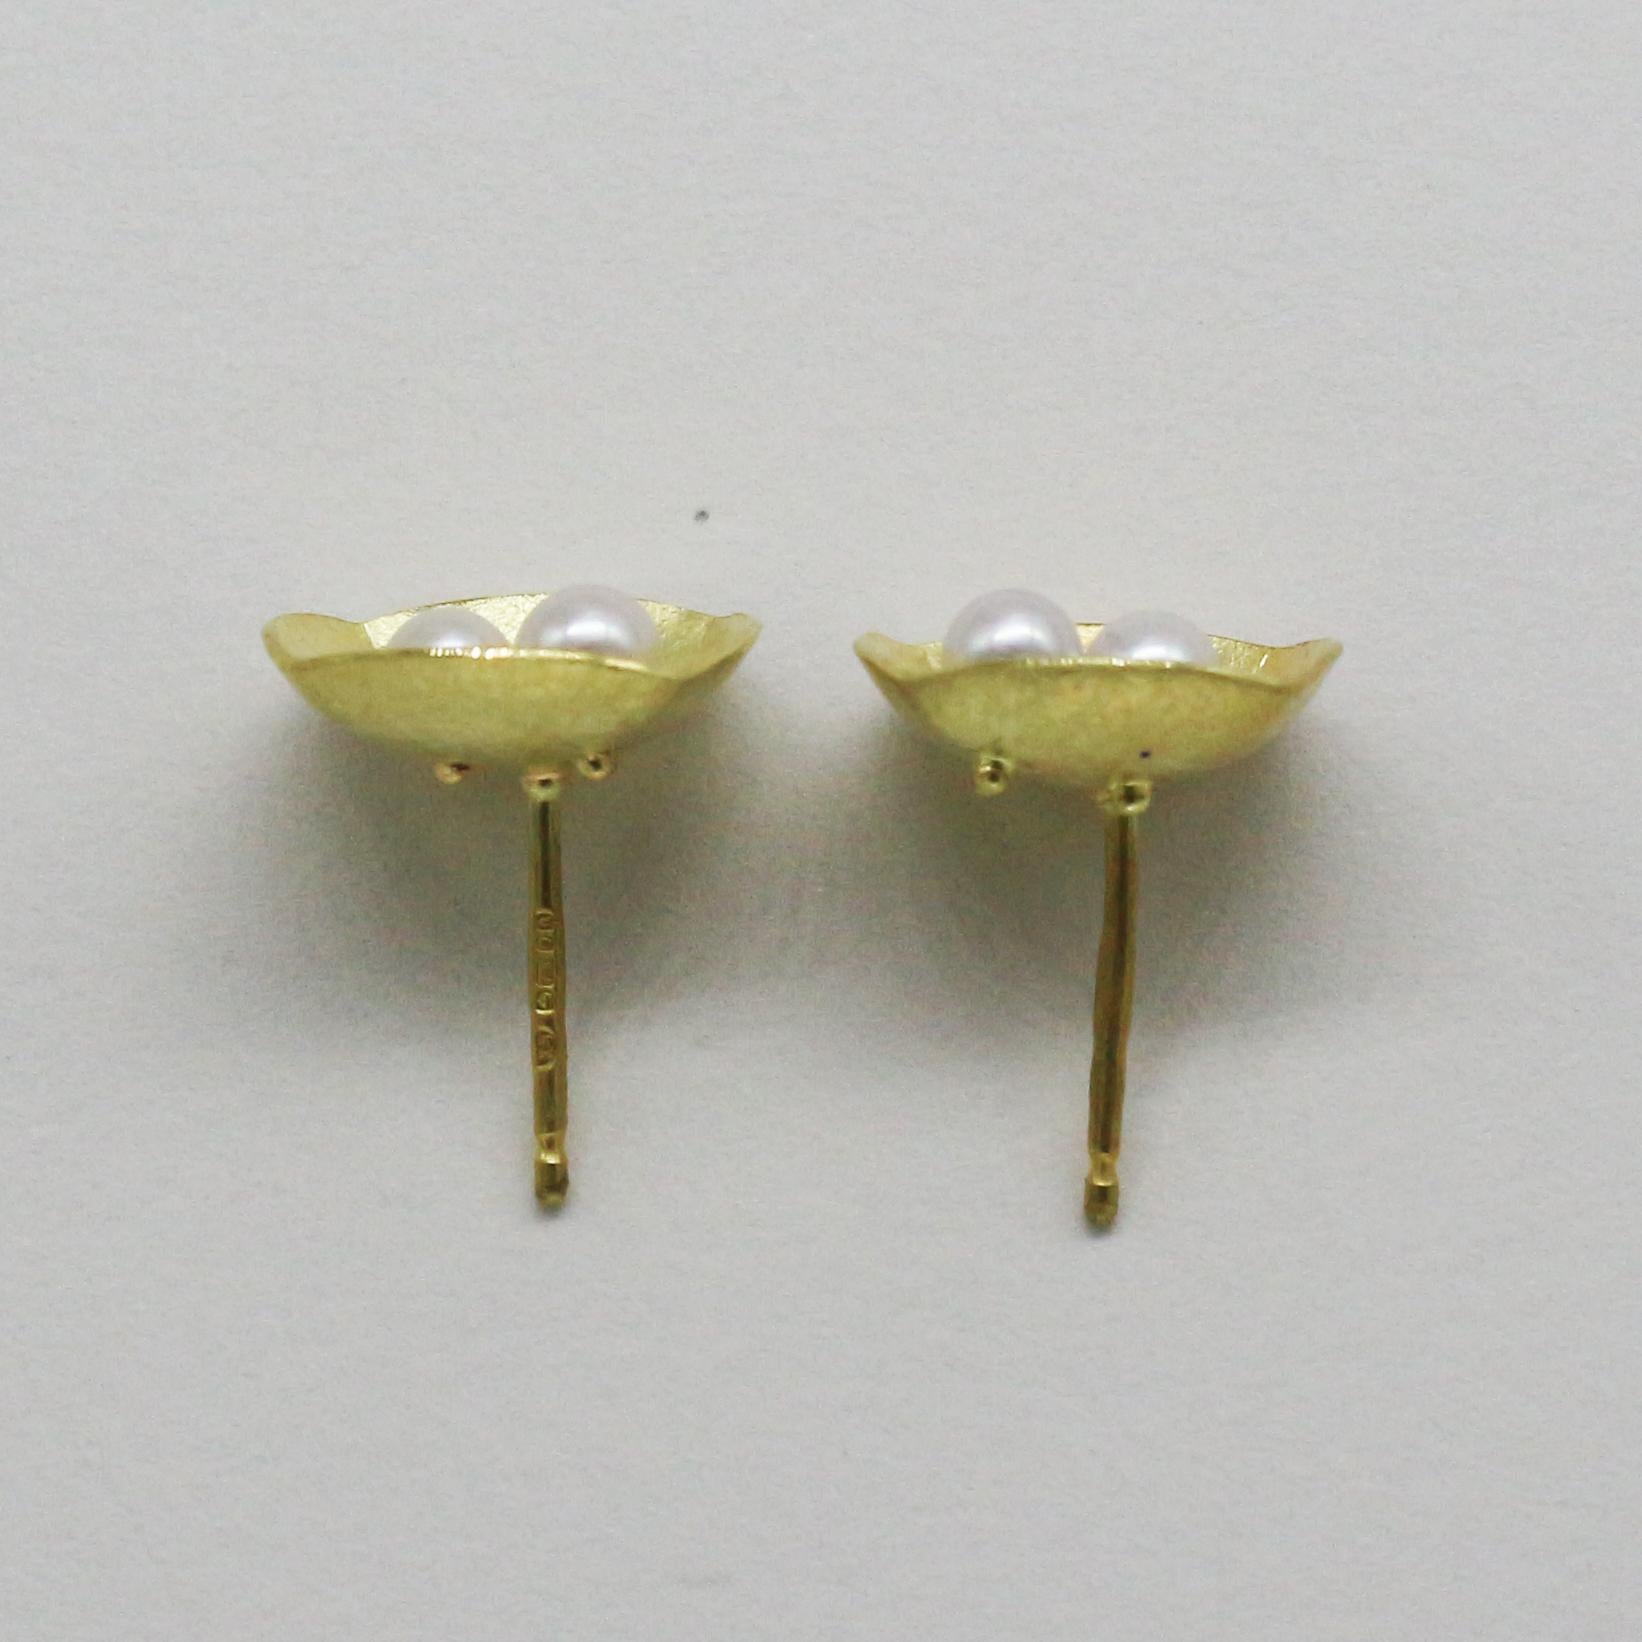 This 18ct gold and Akoya pearl earrings are all hand crafted. Akoya pearls are cultured in Japan and they have a high luster. The earring have a delicate texture of gold that gives a soft warm feel to the piece, with only the polished edges